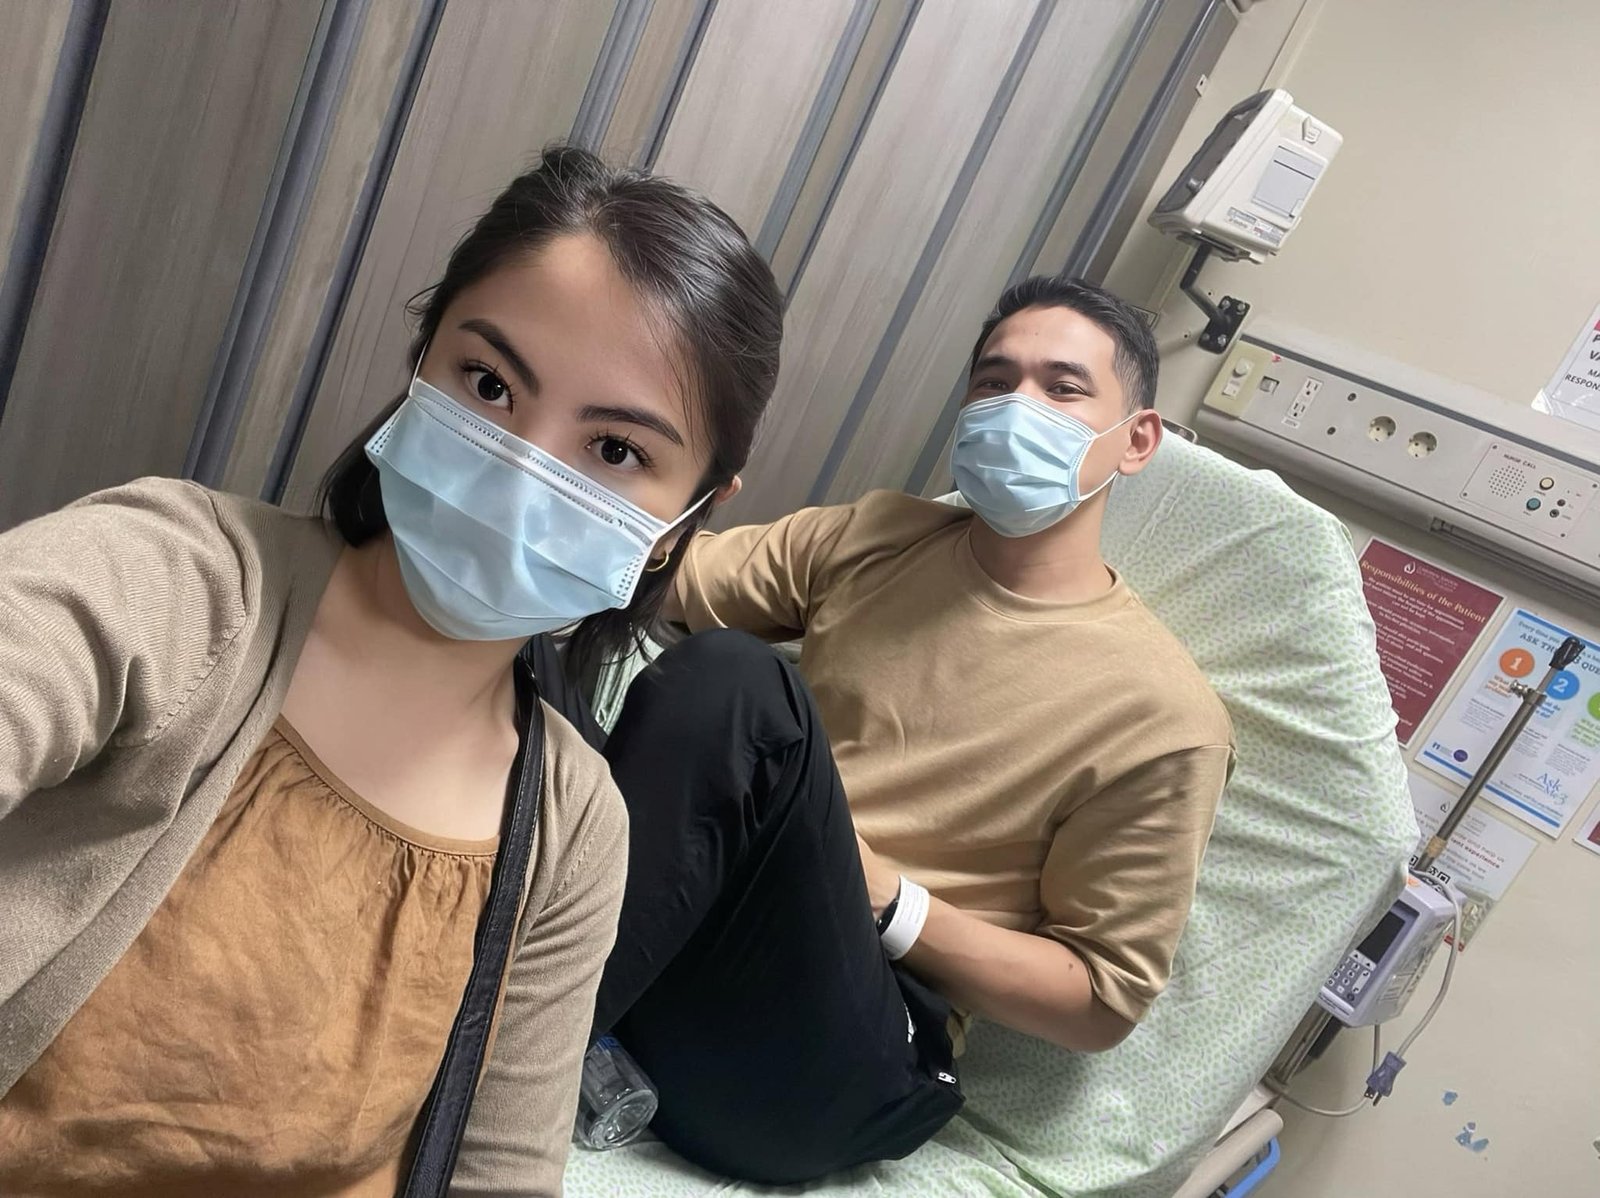 Kevin Alas with wife Selina [photo credit: Kevin Alas Facebook]